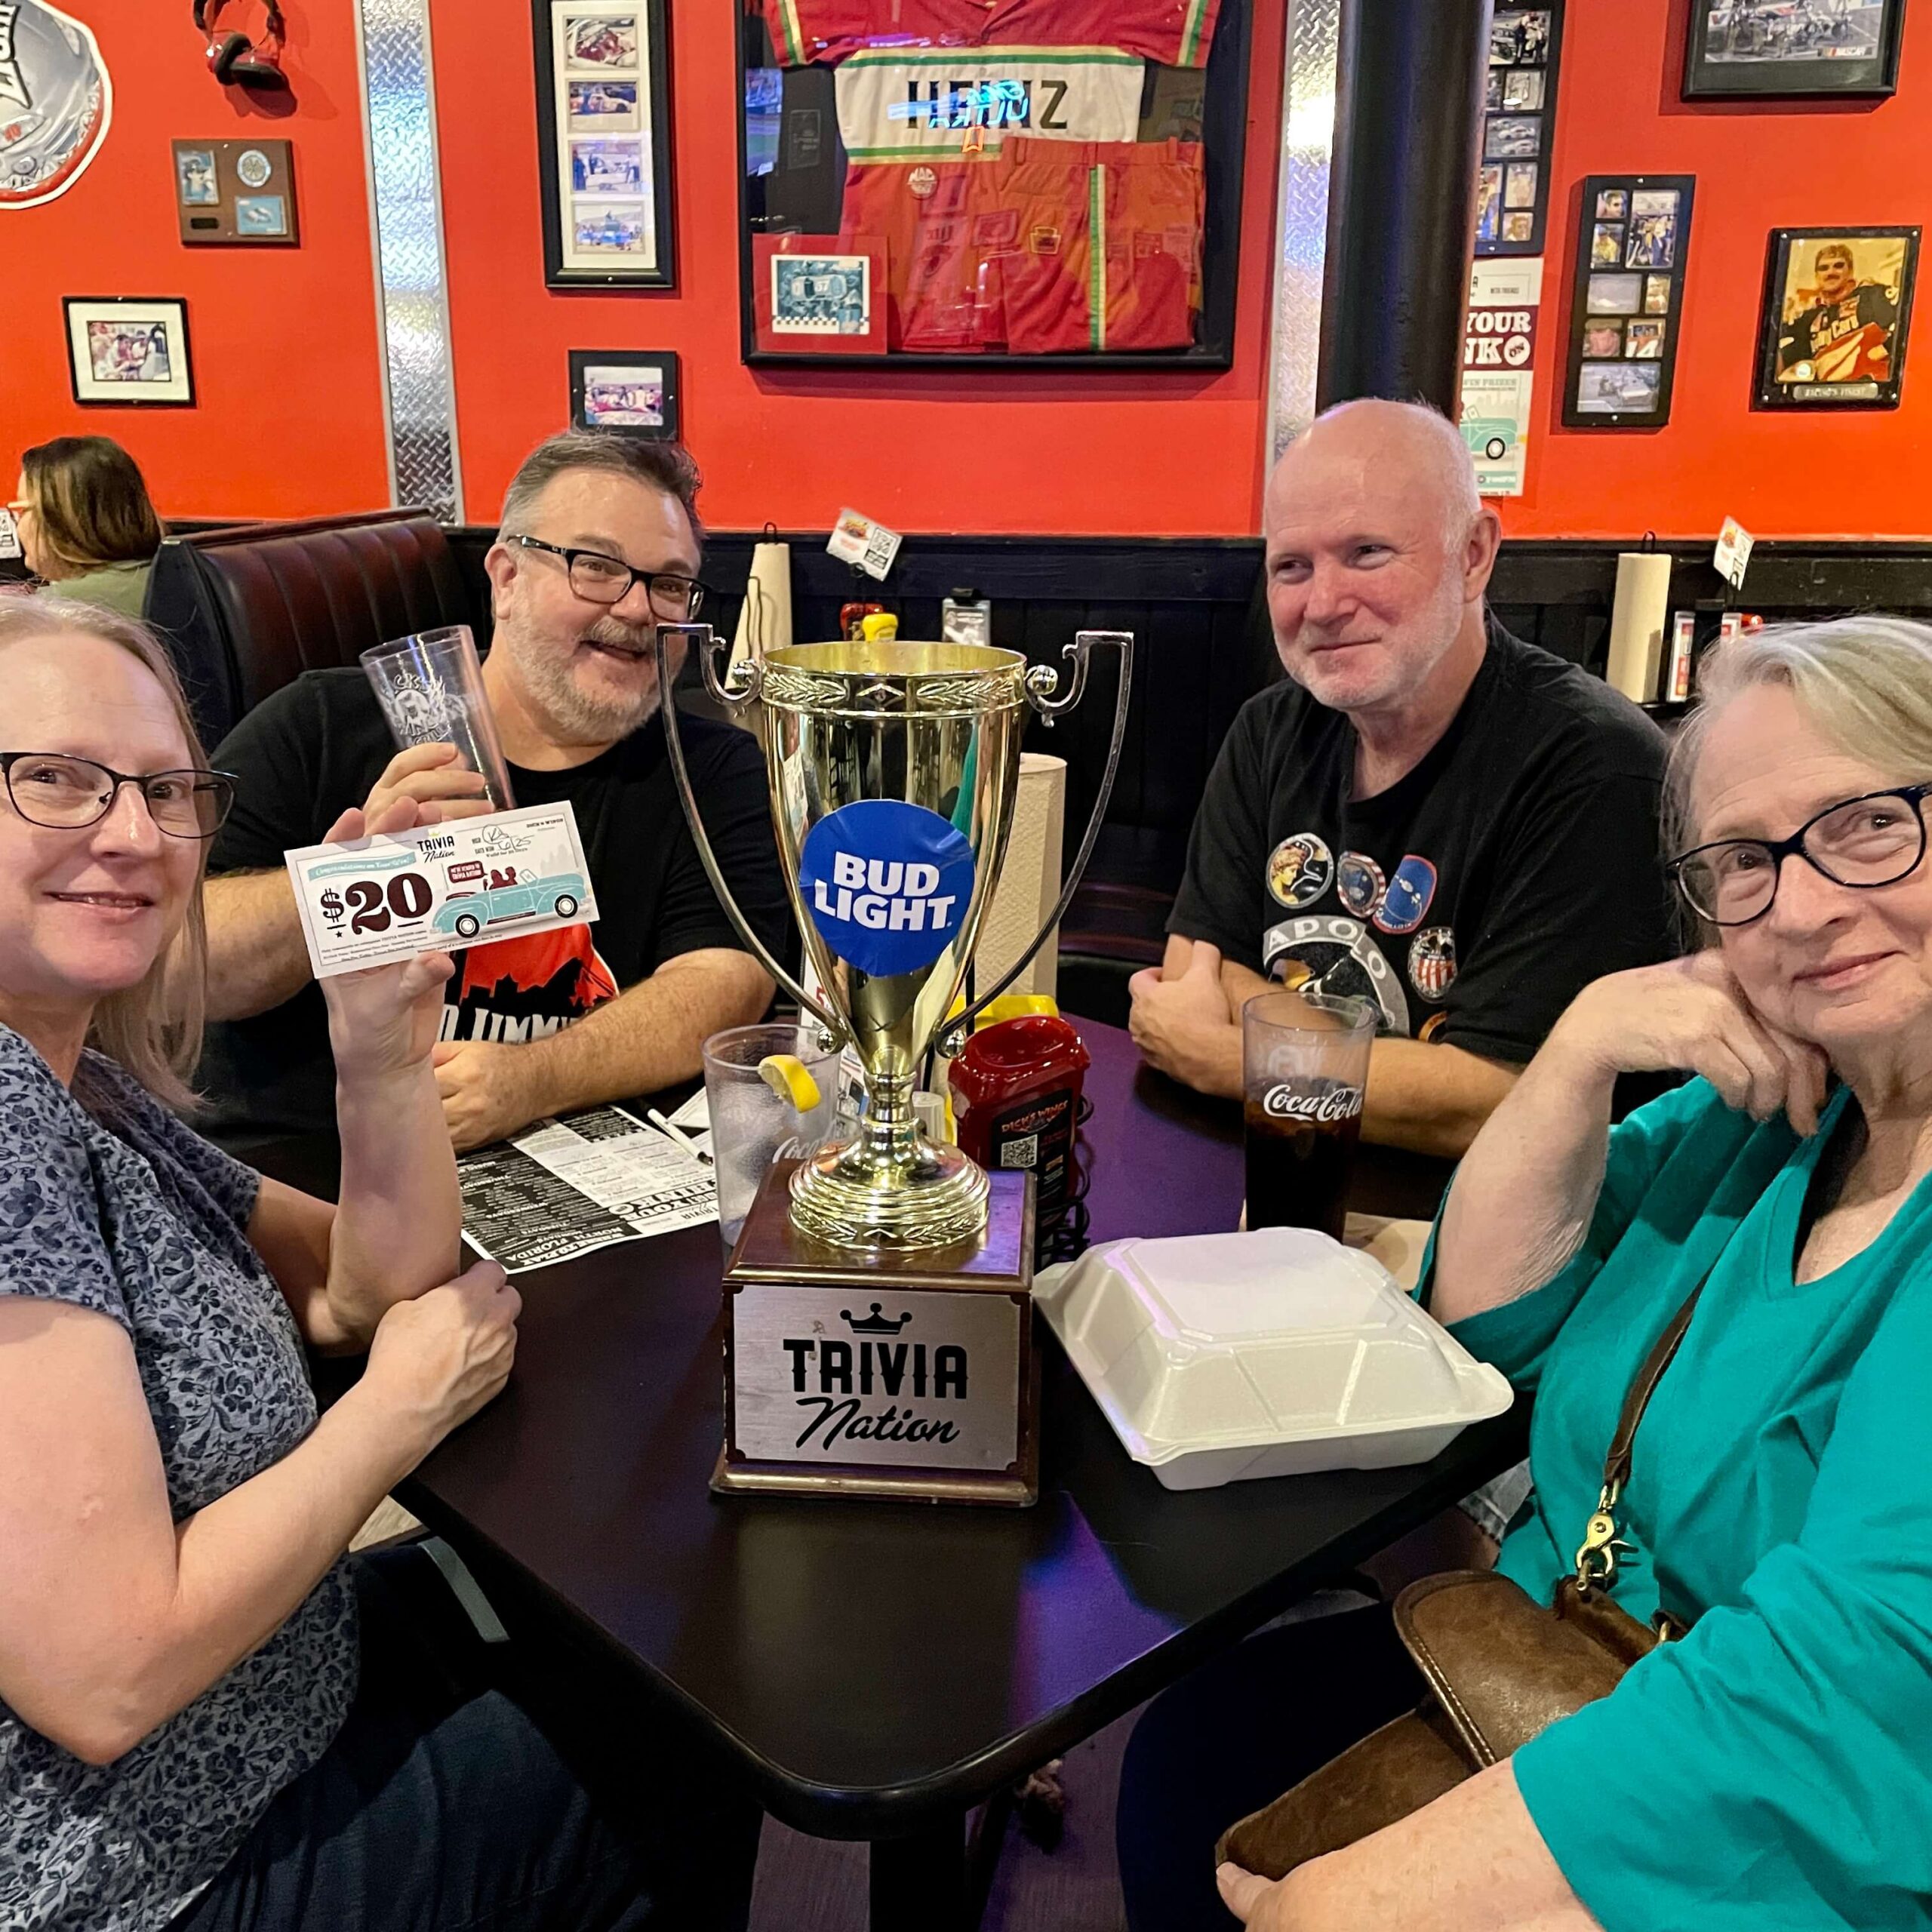 Dick's Wings and Grill Jacksonville FL 32225 trivia night 4